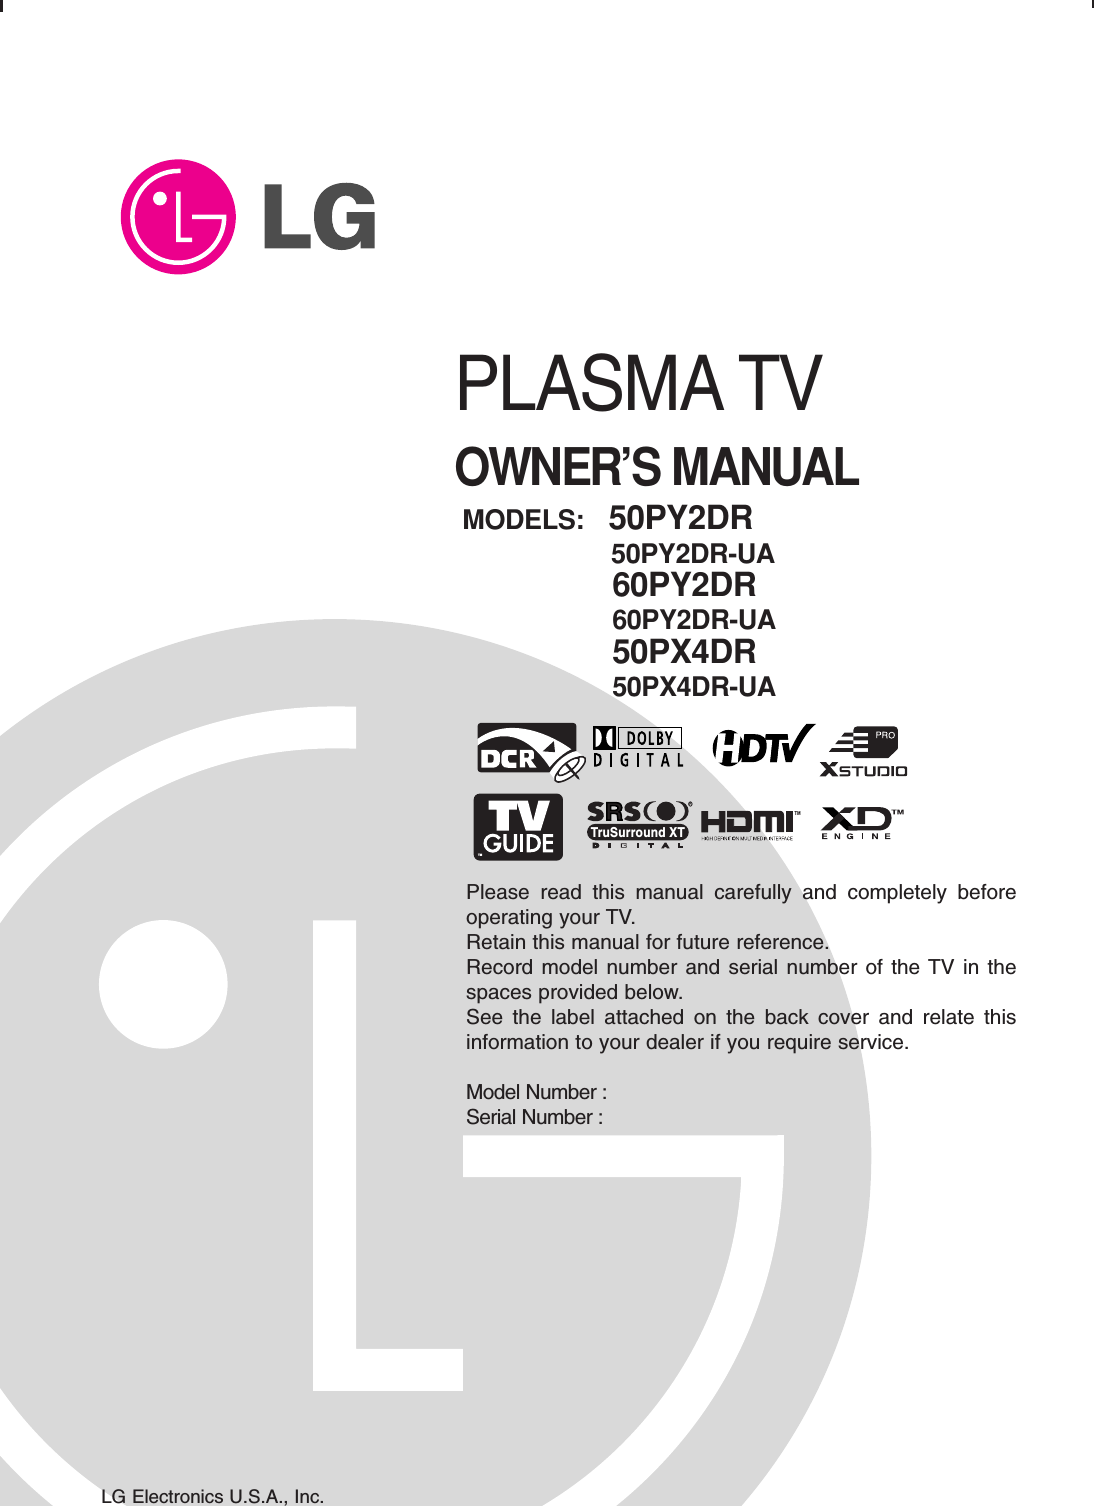 Please read this manual carefully and completely beforeoperating your TV. Retain this manual for future reference.Record model number and serial number of the TV in thespaces provided below. See the label attached on the back cover and relate thisinformation to your dealer if you require service.Model Number : Serial Number : MODELS: 50PY2DR50PY2DR-UA60PY2DR60PY2DR-UA50PX4DR50PX4DR-UALG Electronics U.S.A., Inc.TMRTruSurround XTPLASMA TVOWNER’S MANUAL